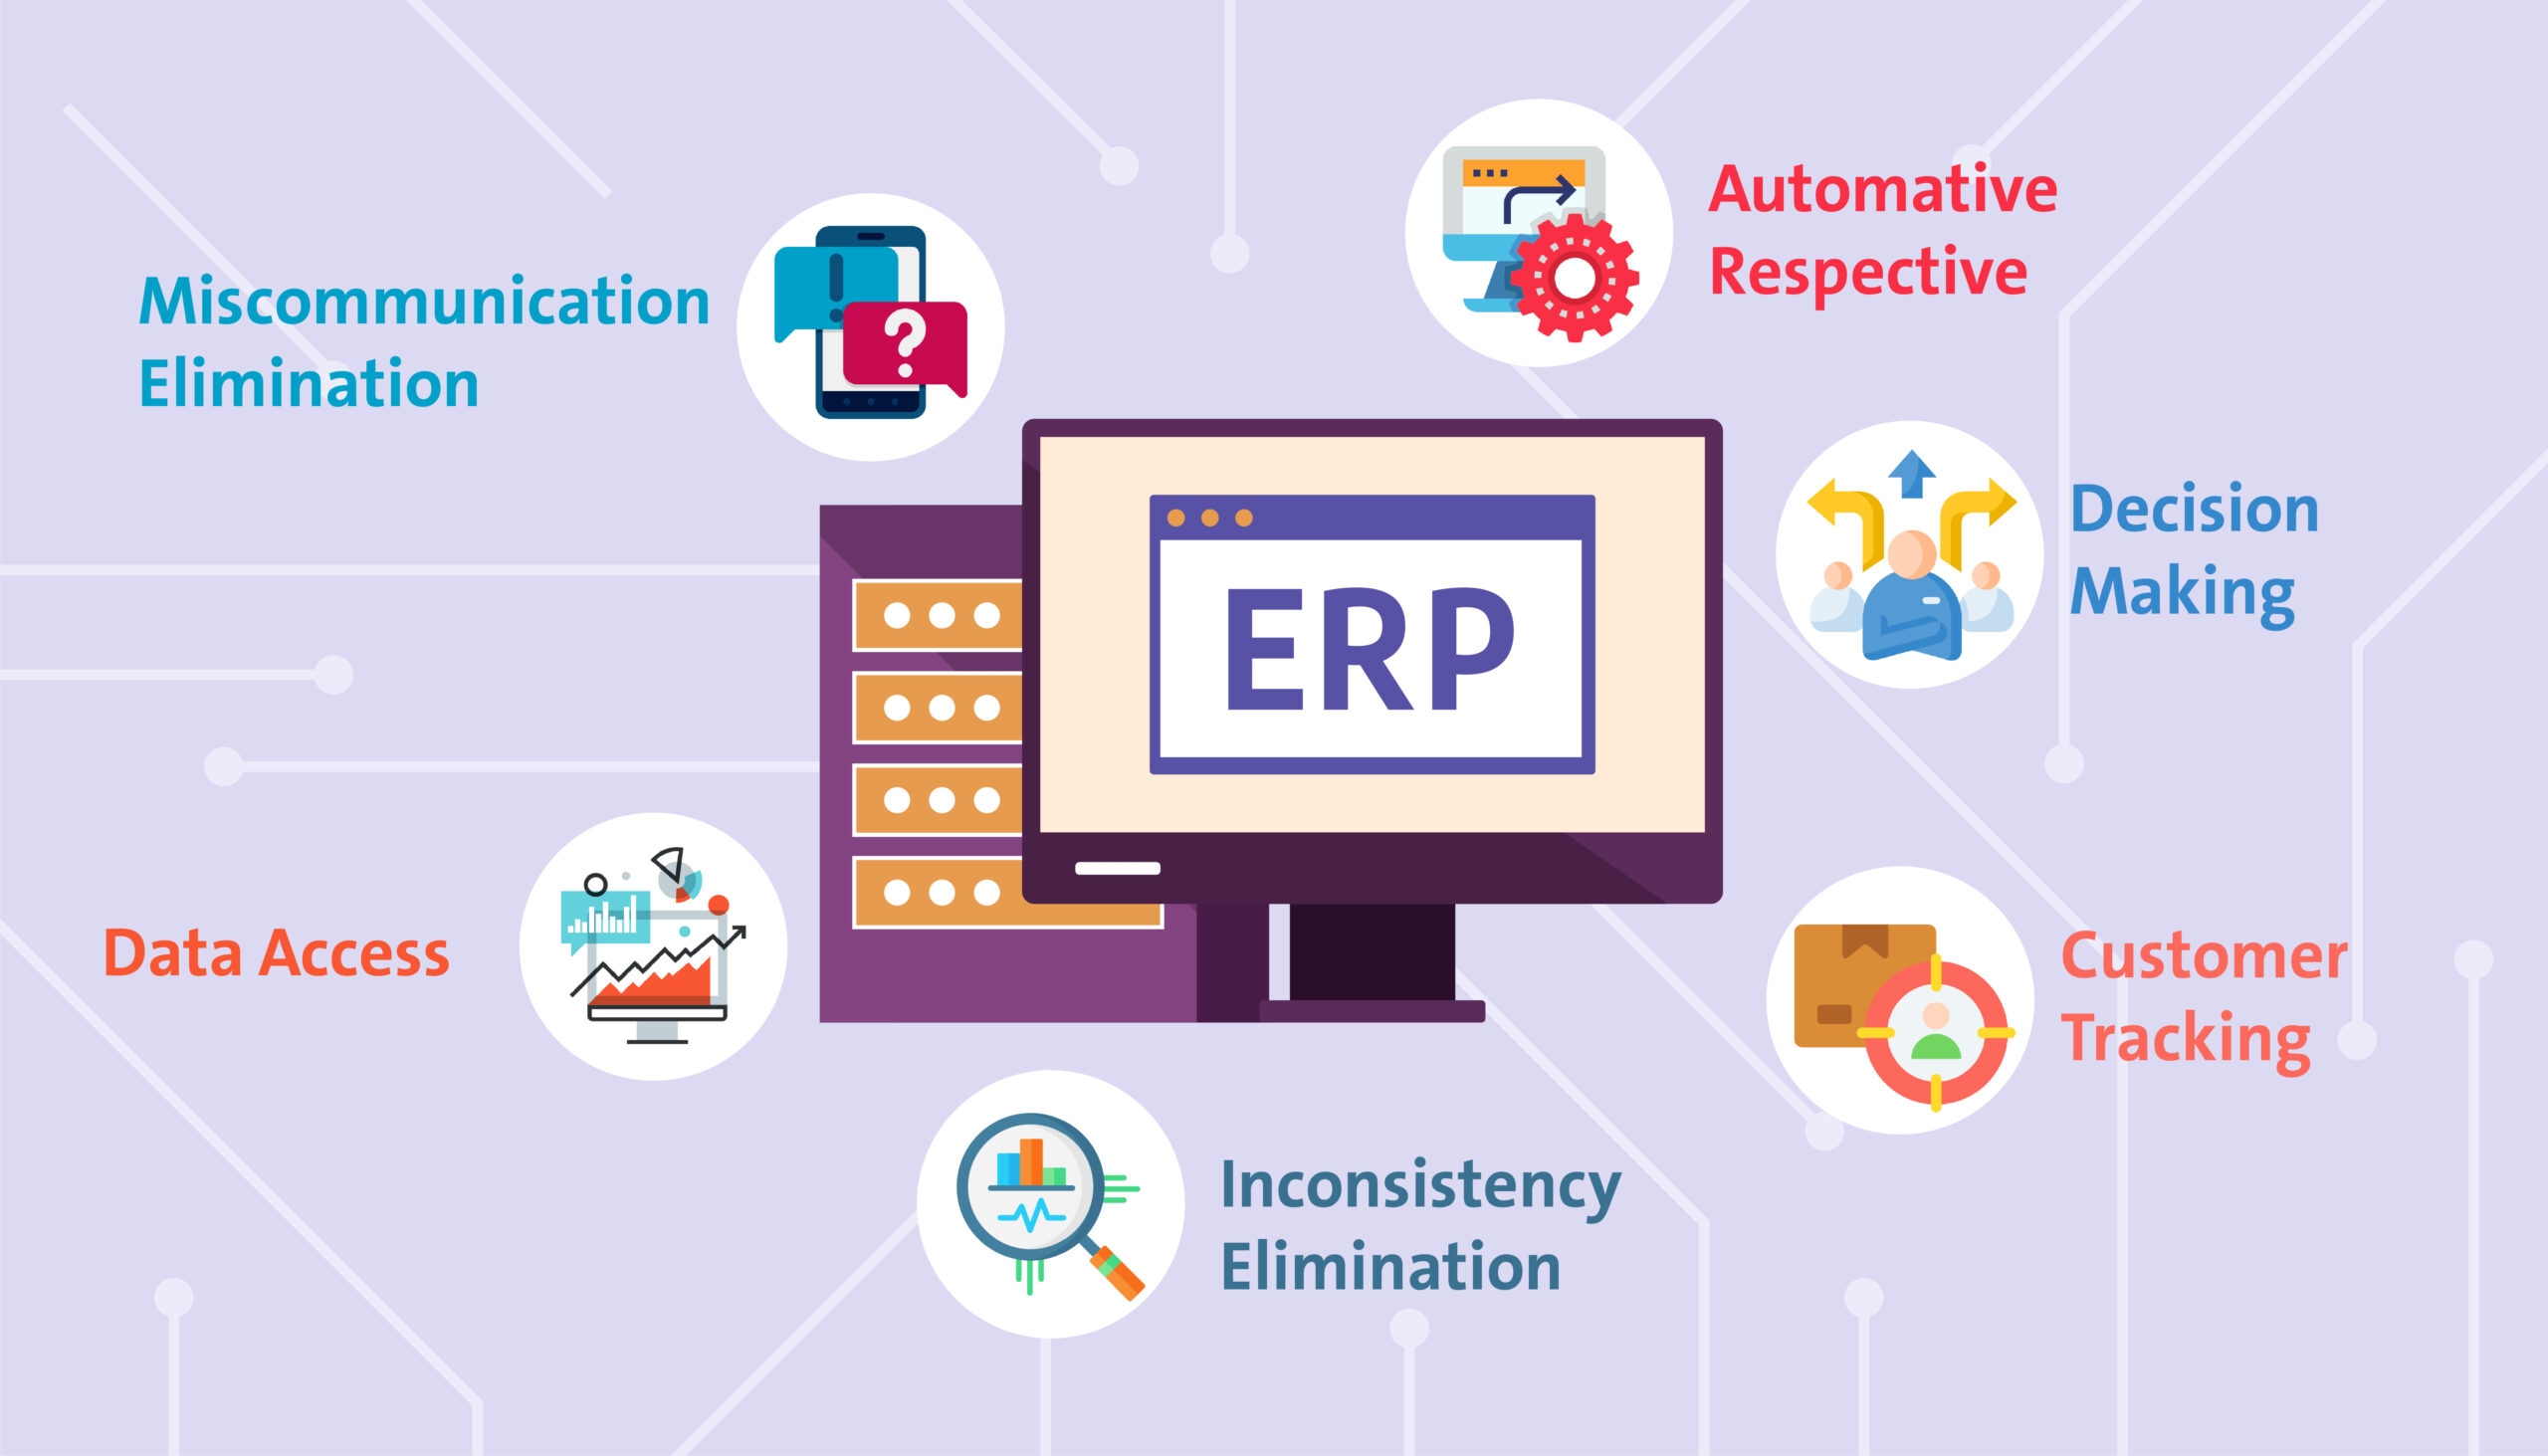 Fig 1: How can ERP help organization?